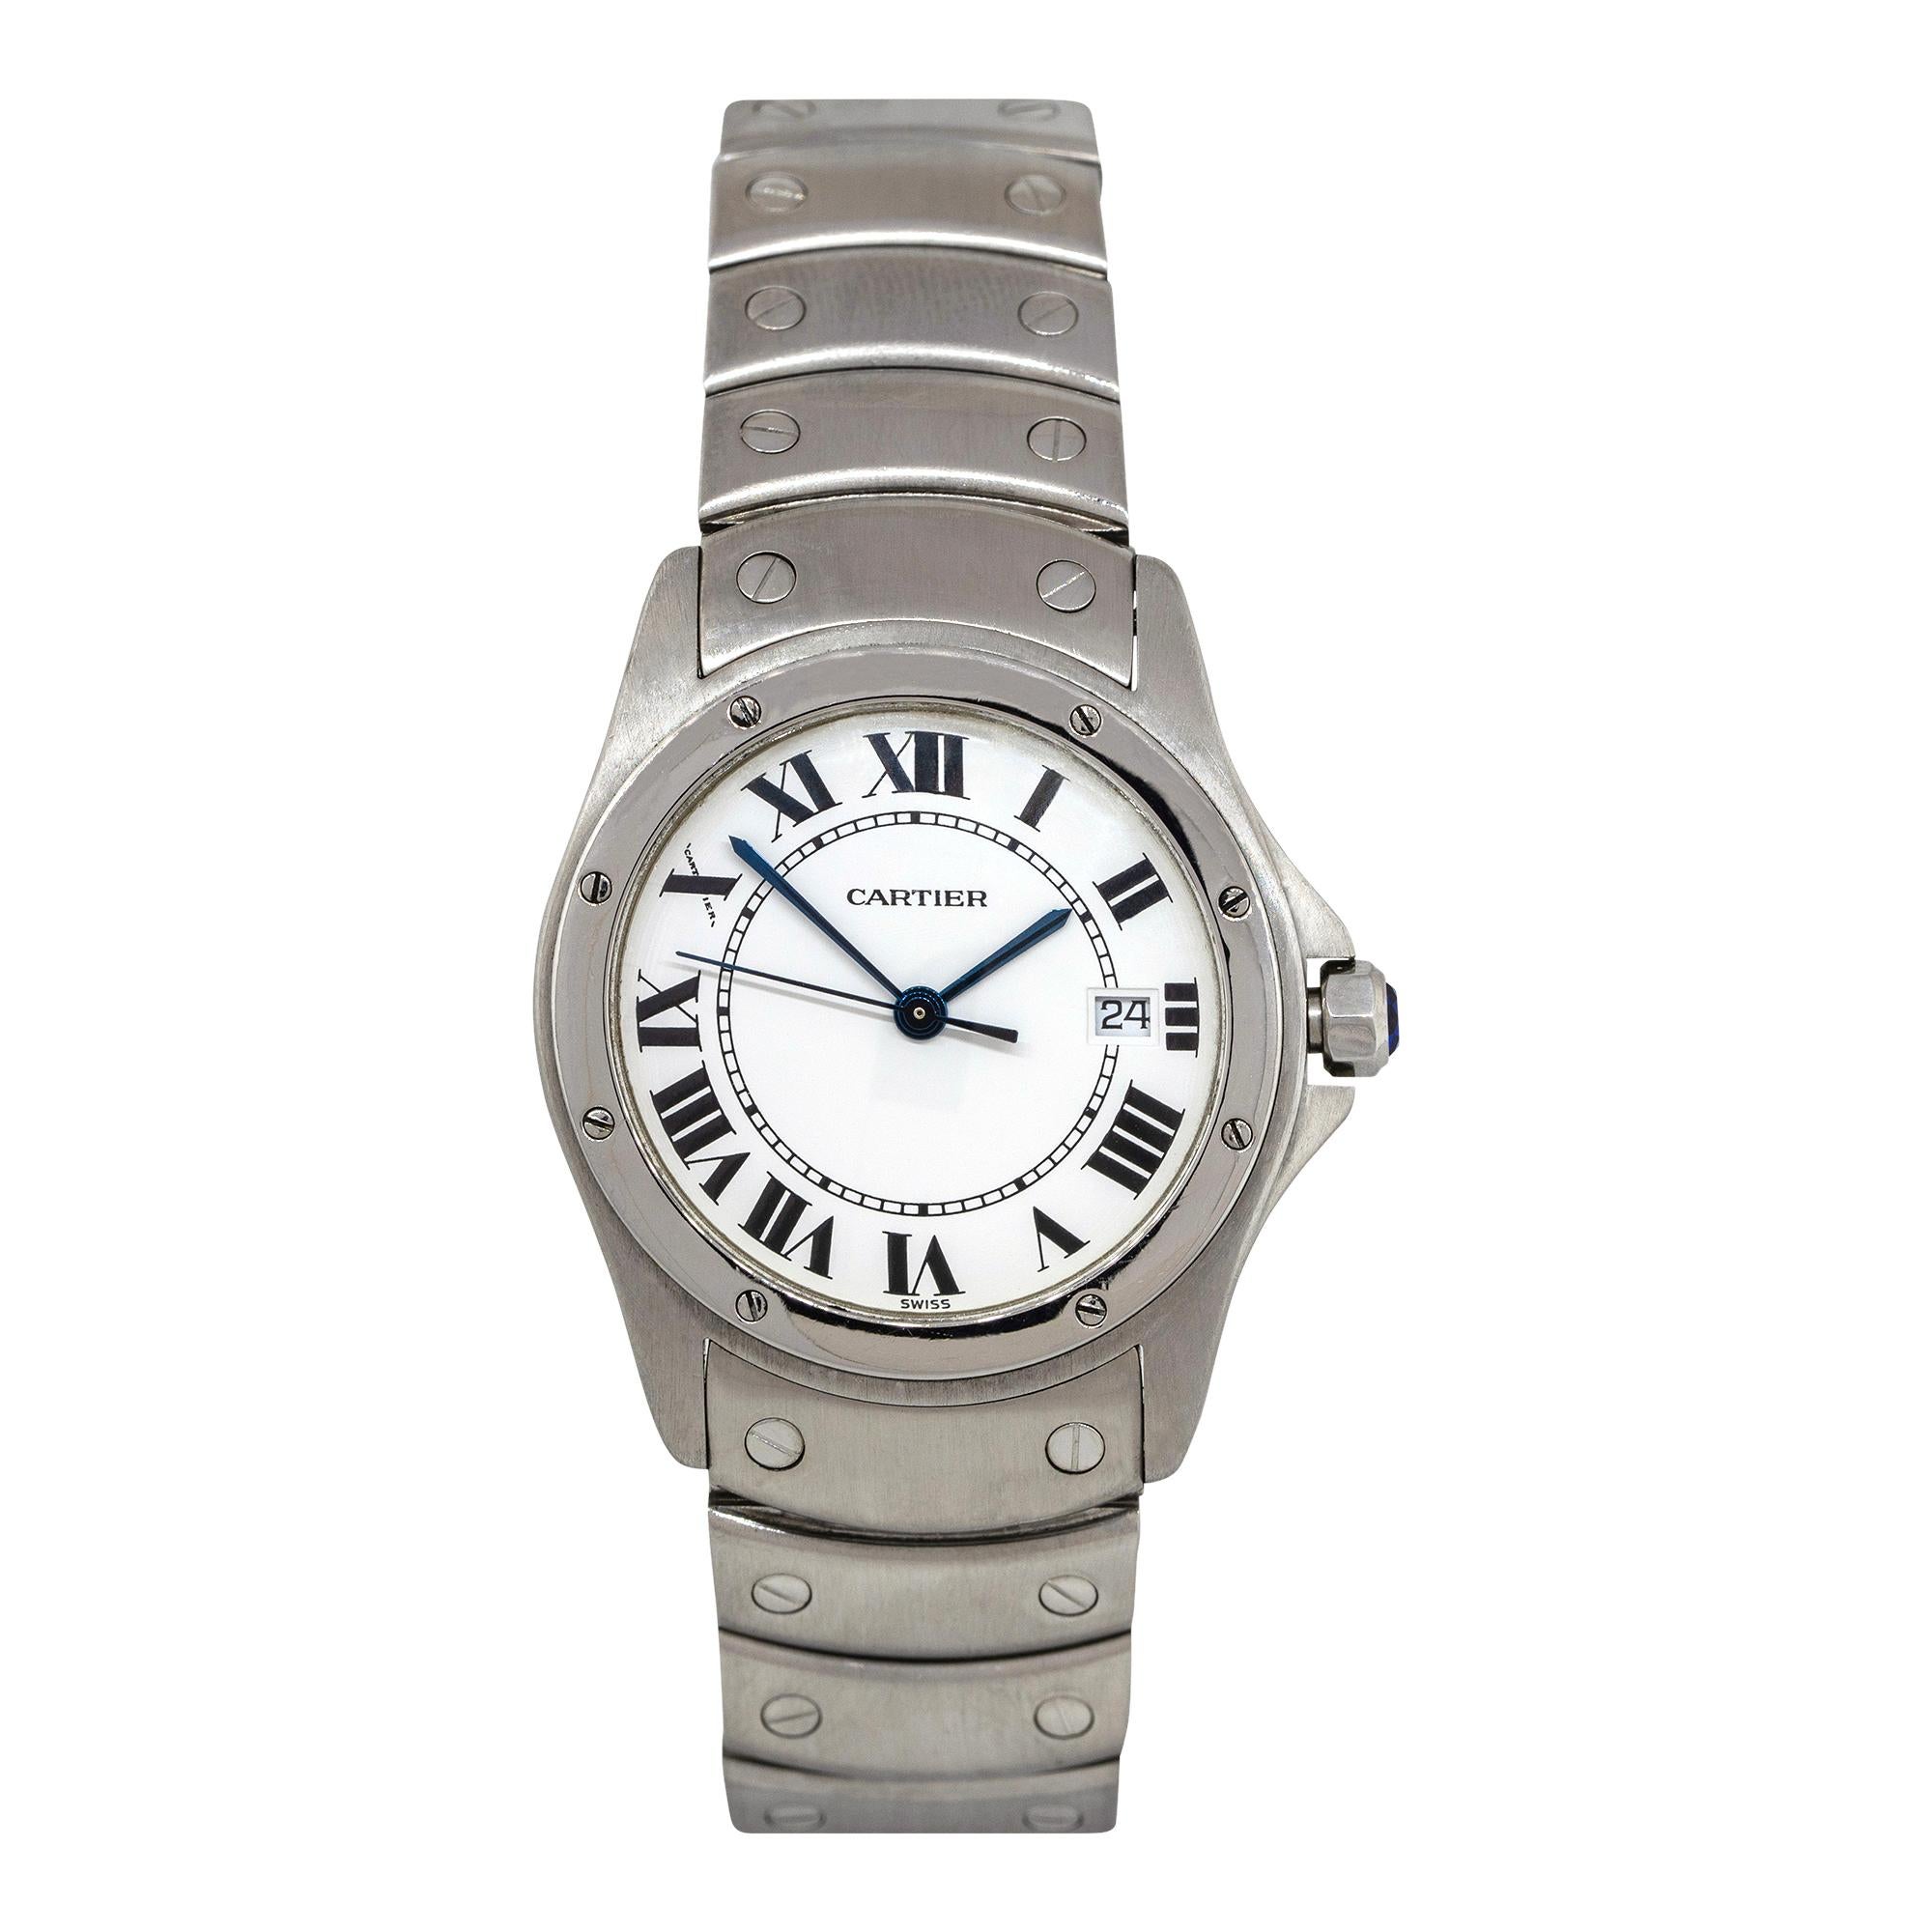 Brand: Cartier
Case Material: Stainless steel
Case Diameter: 29mm
Bracelet: Stainless steel link bracelet
Dial: White dial with roman numeral hour markers. Date is displayed at 3 o' clock.
Bezel: Stainless steel link bracelet
Crystal: Sapphire